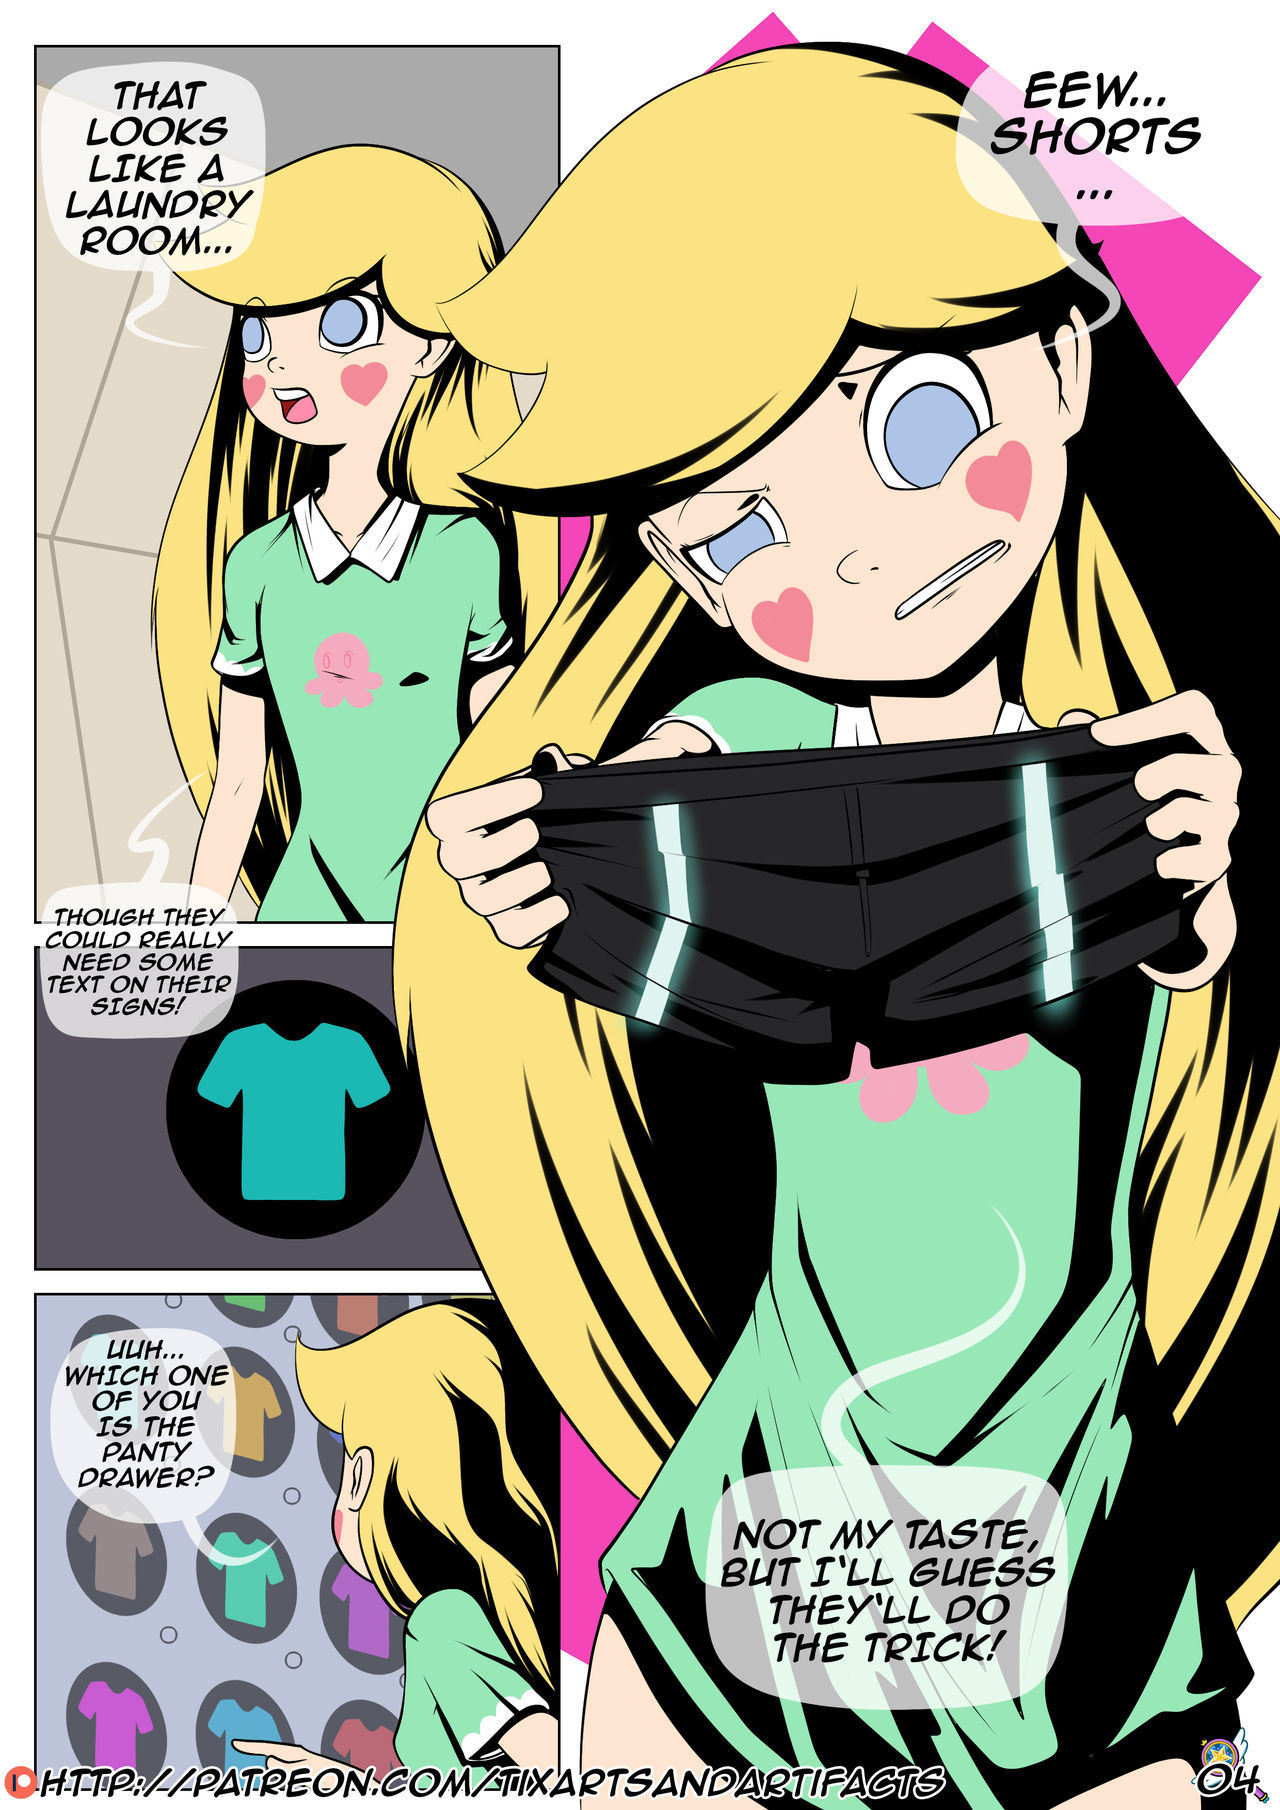 Between Dimensions Part 2 - Magic Panties by Pixelboy page 5